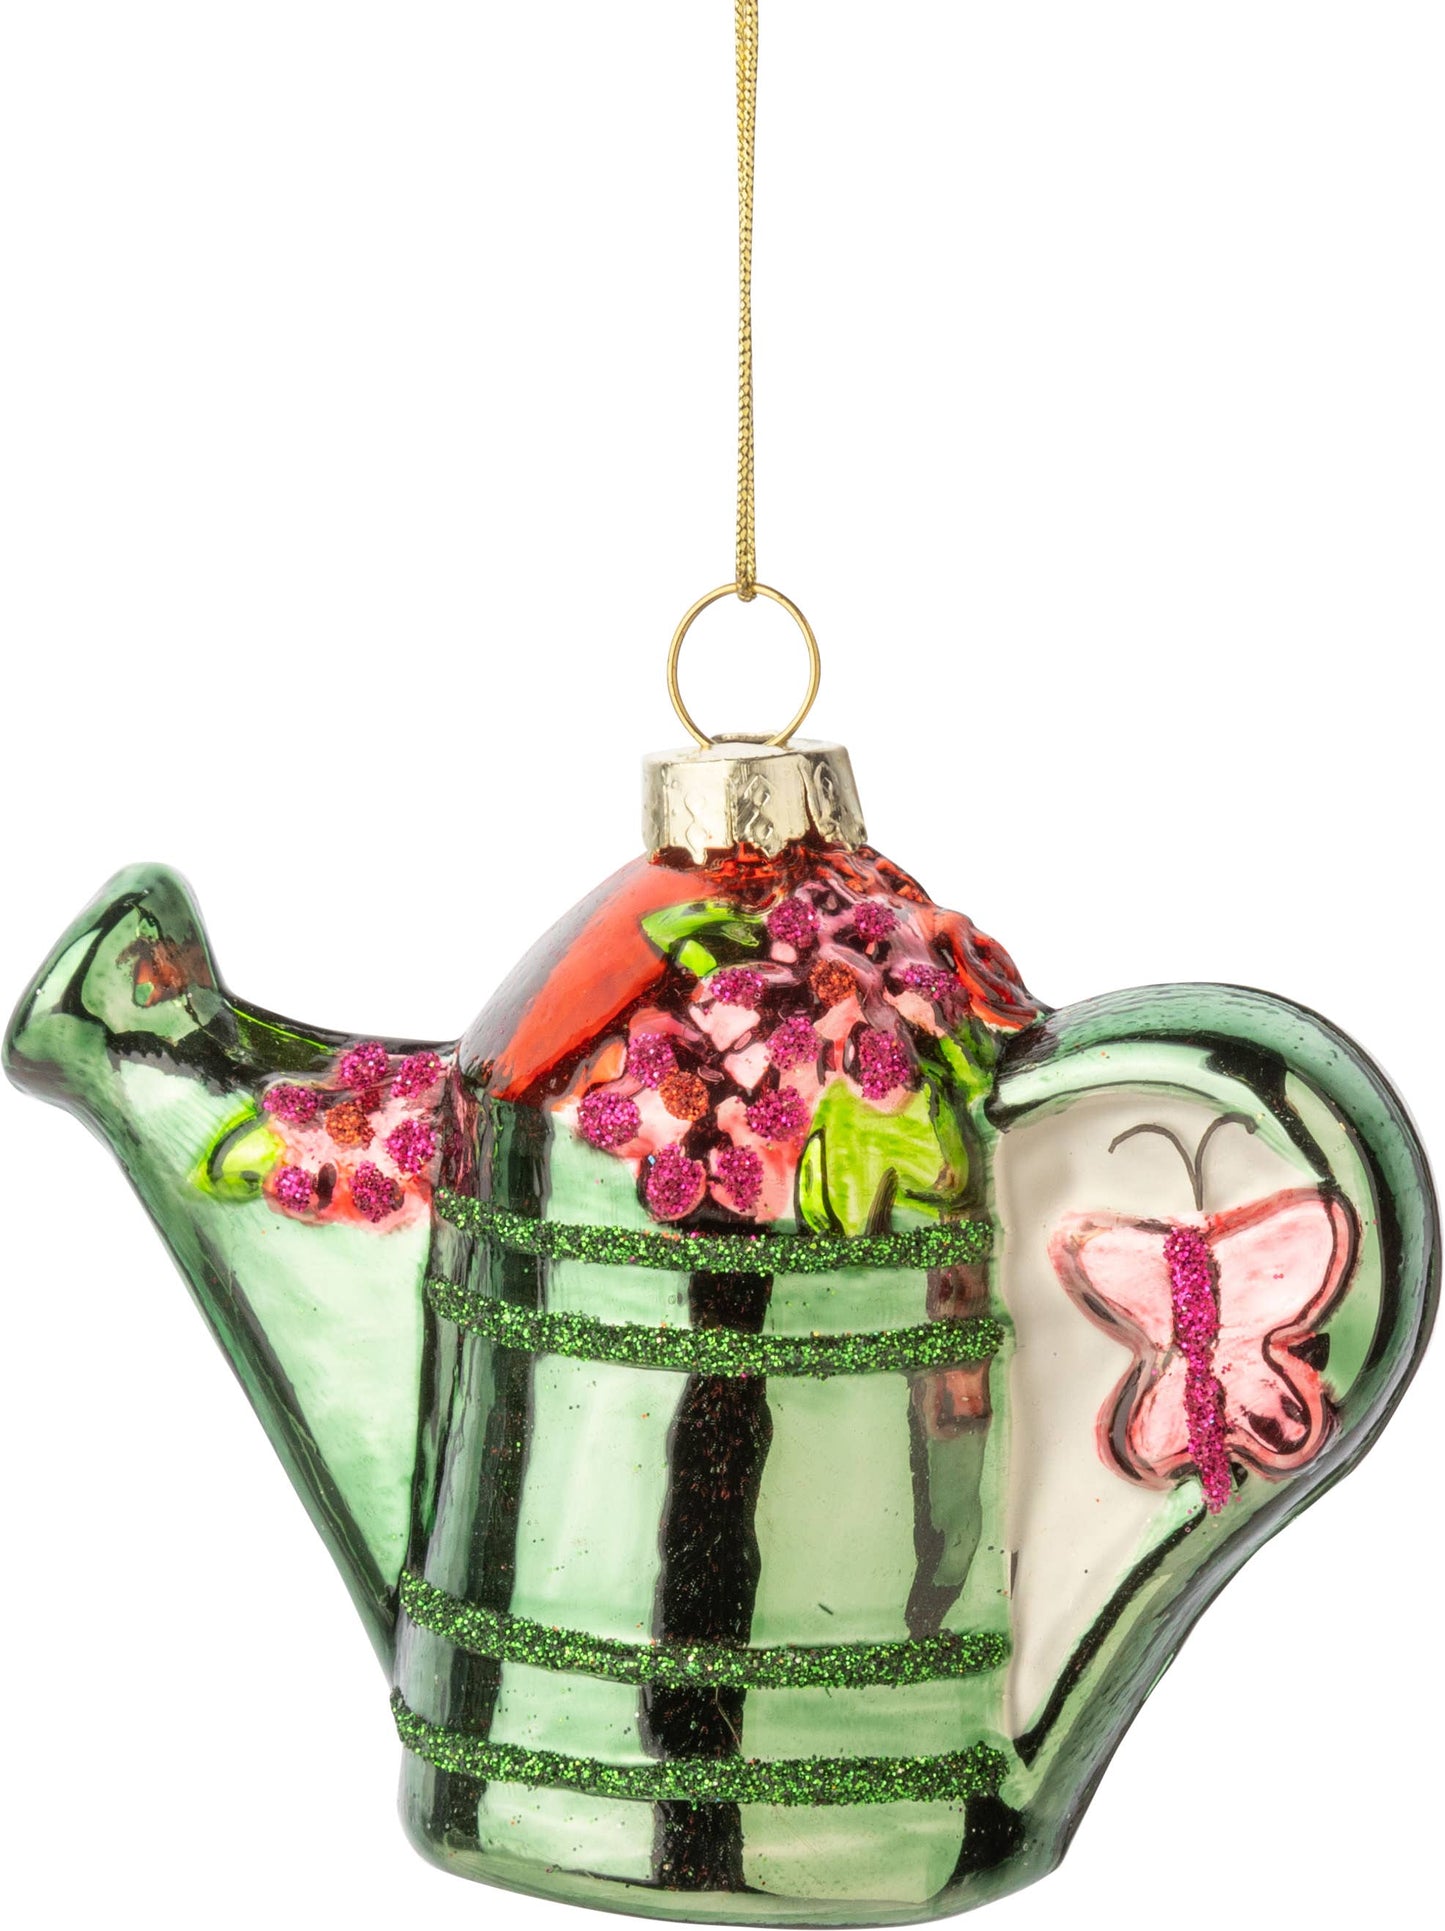 A14199-Glass floral watering can orn,4in